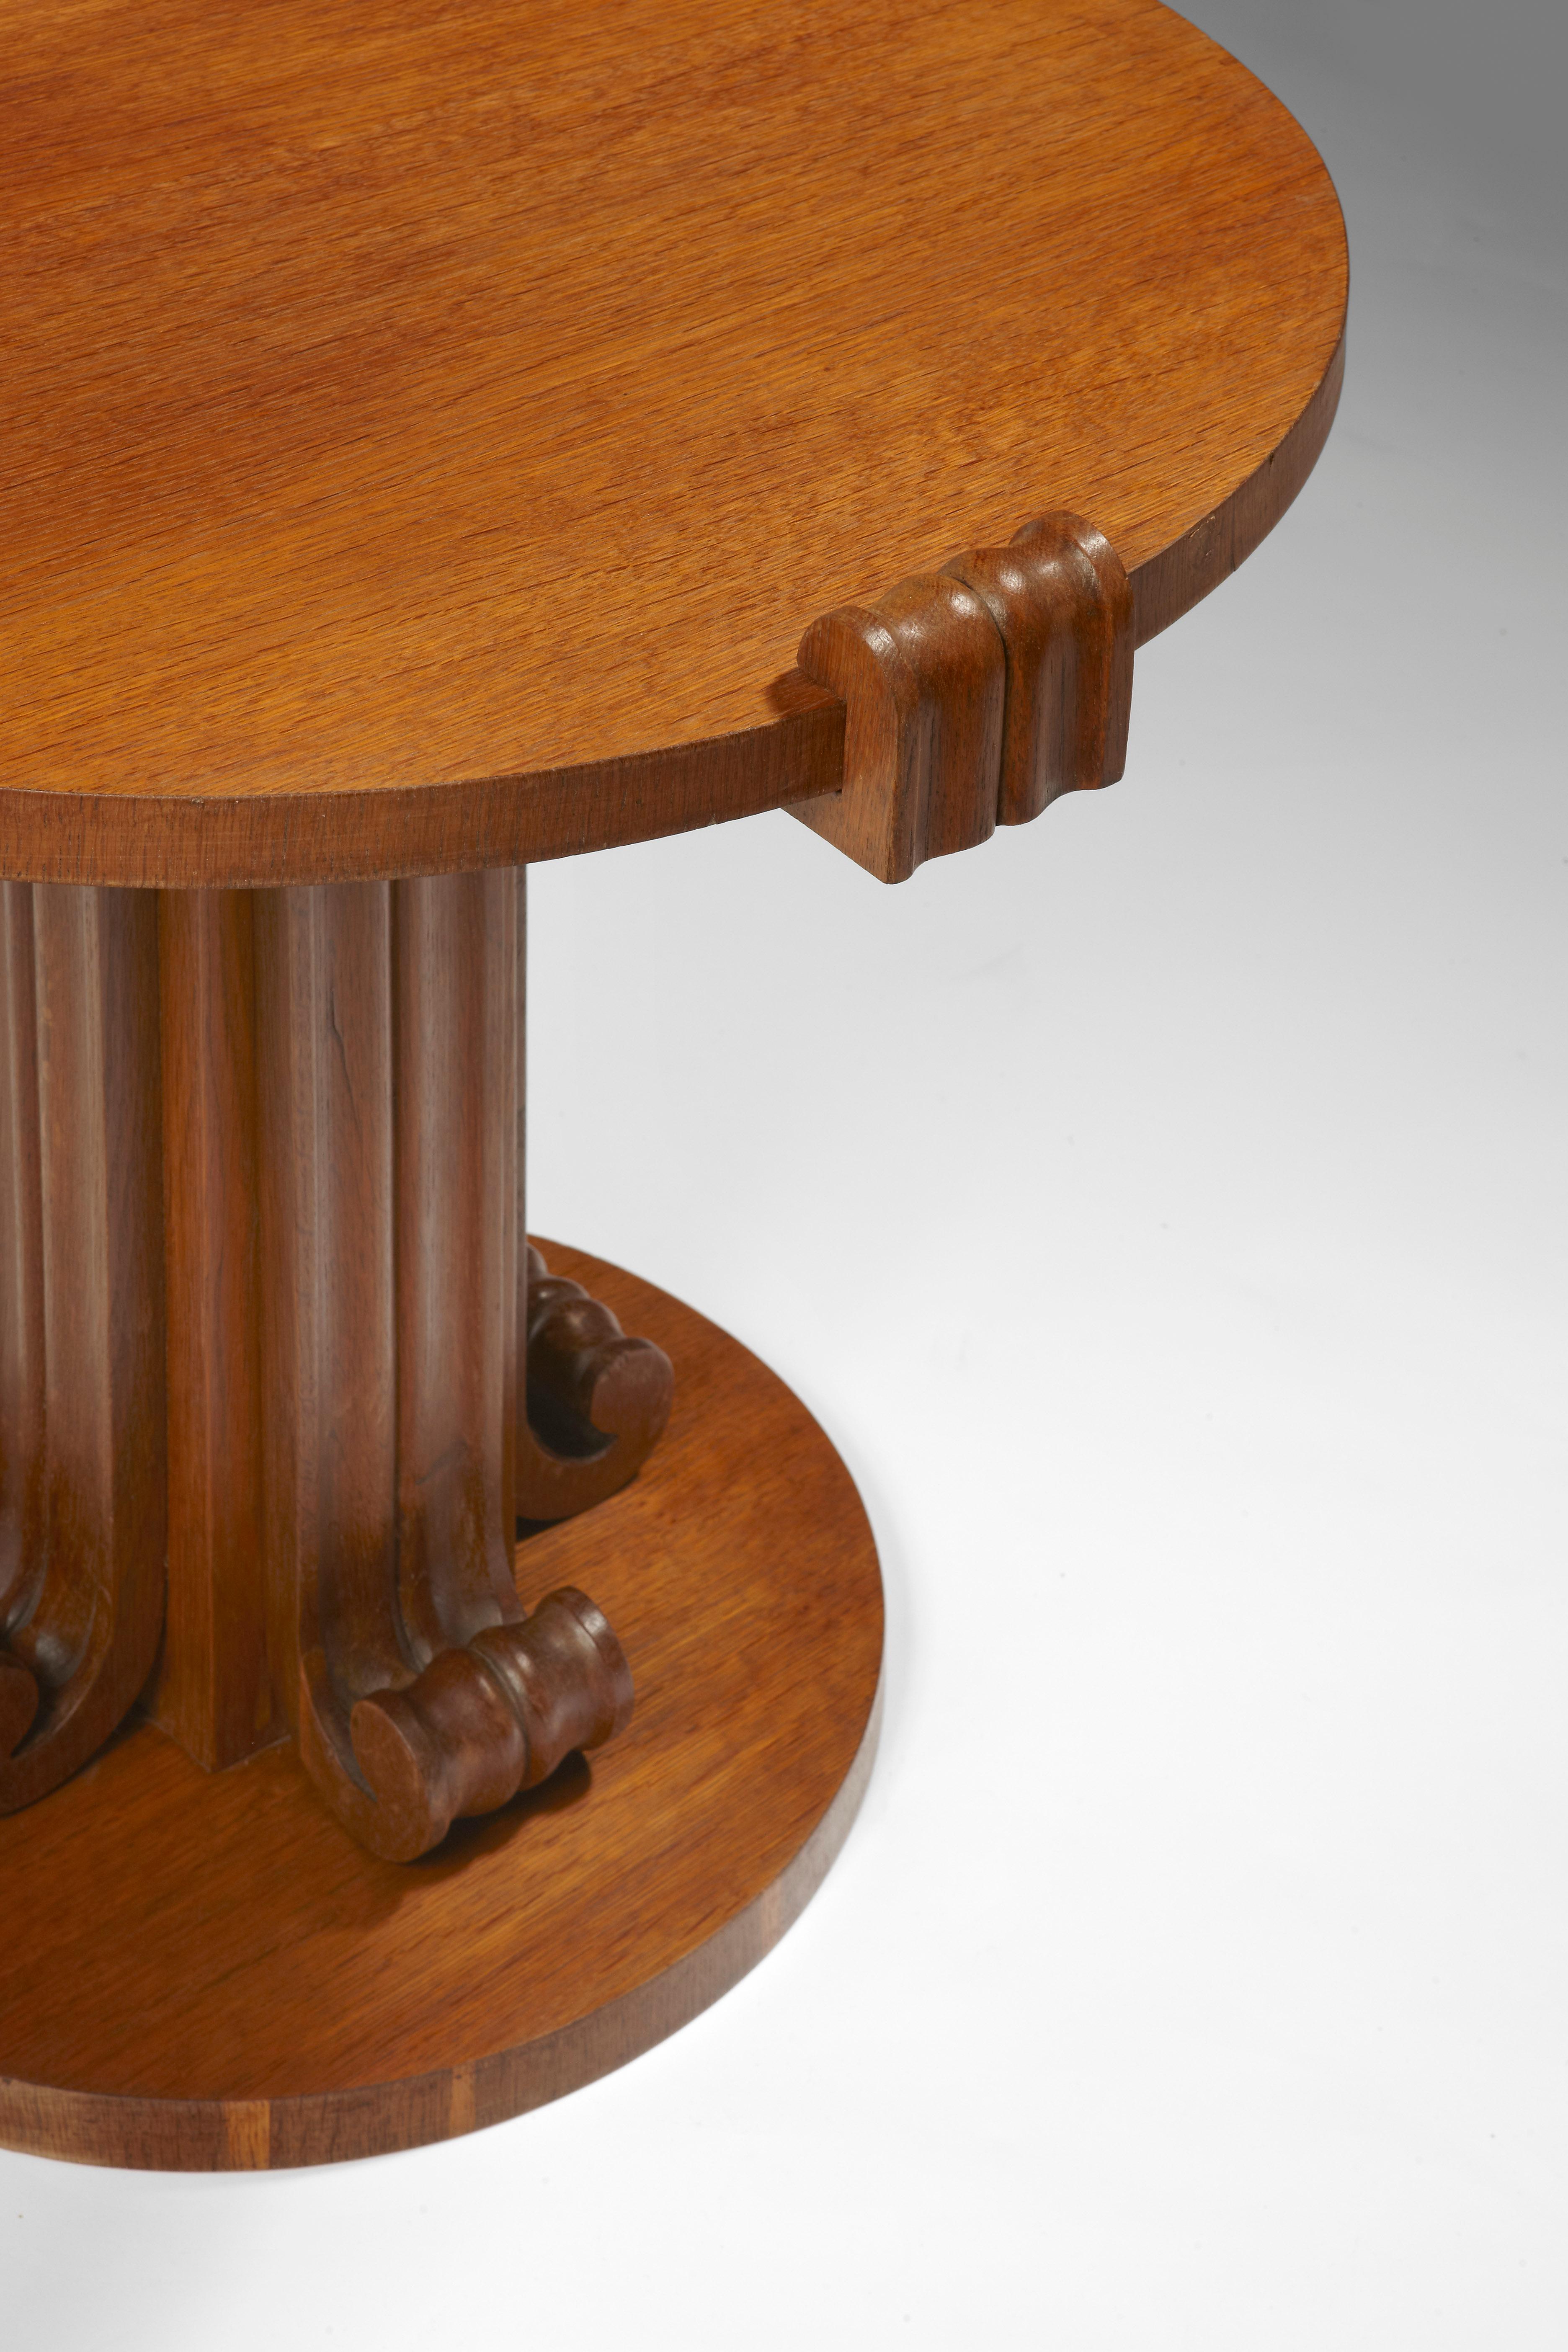 Mahogany pedestal table by Jean-Charles Moreux and Bolette Natanson, circa 1935-1936.
Pedestal table in mahogany tinted Oak. The circular top, maintained by four scrowls, stands on a central foot, ended with volutes. It stands on a circular